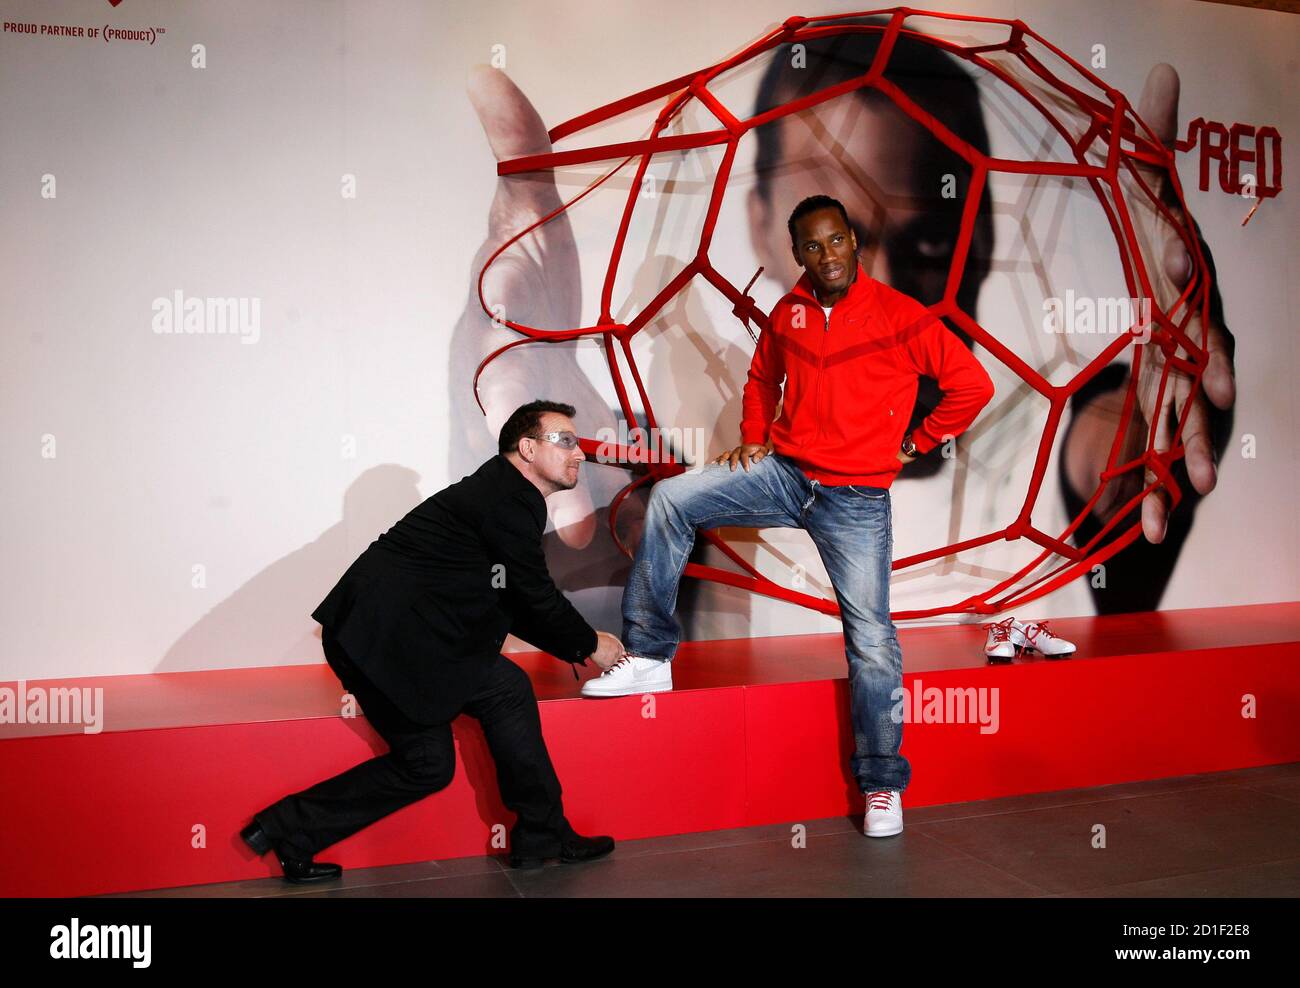 Singer Bono (L) and footballer Didier Drogba pose for photographers after a  news conference to launch a partnership between Nike and (RED) in London,  November 30, 2009. The two groups will unite